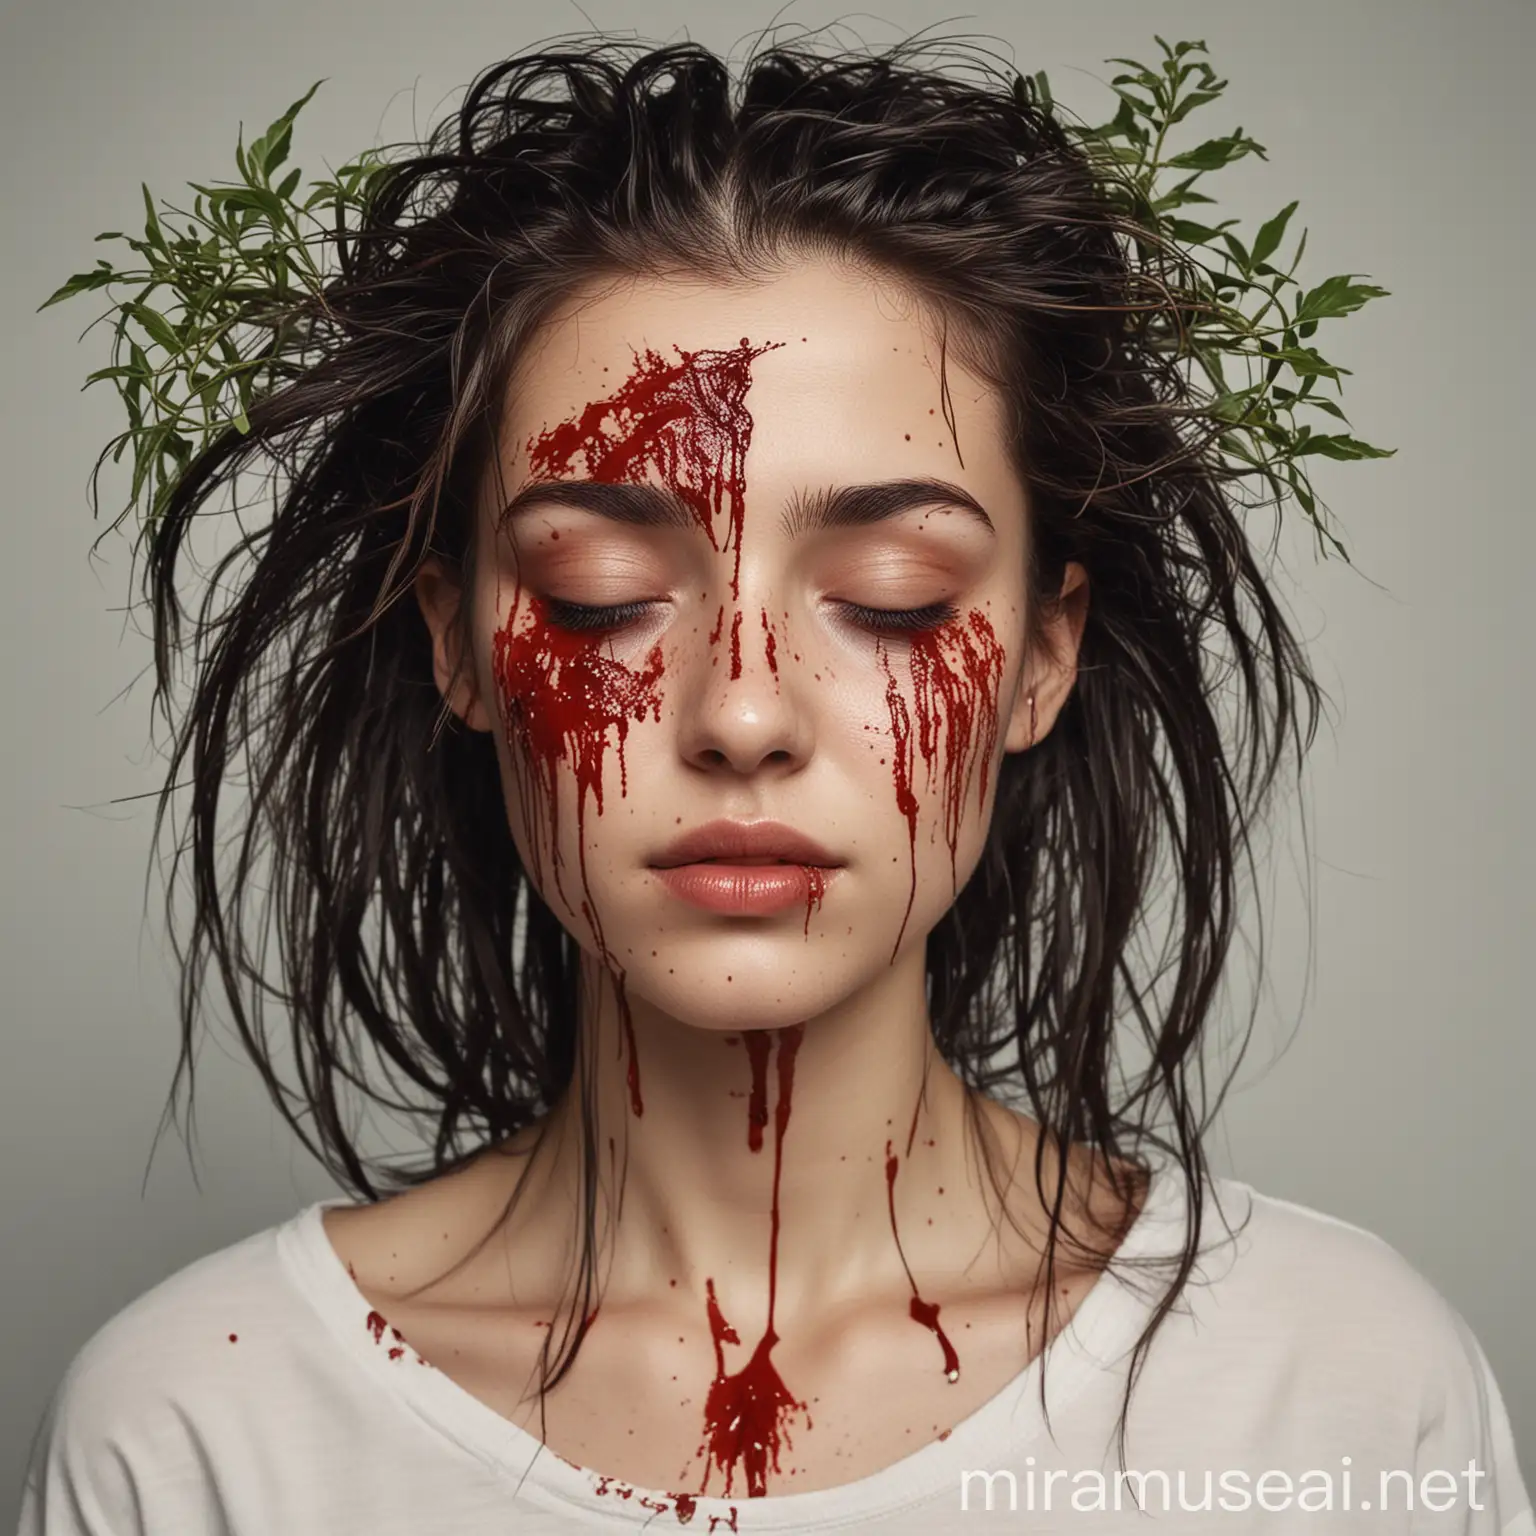 Women with Blood and Stroke A Surreal Portrait of Planthaired Figures